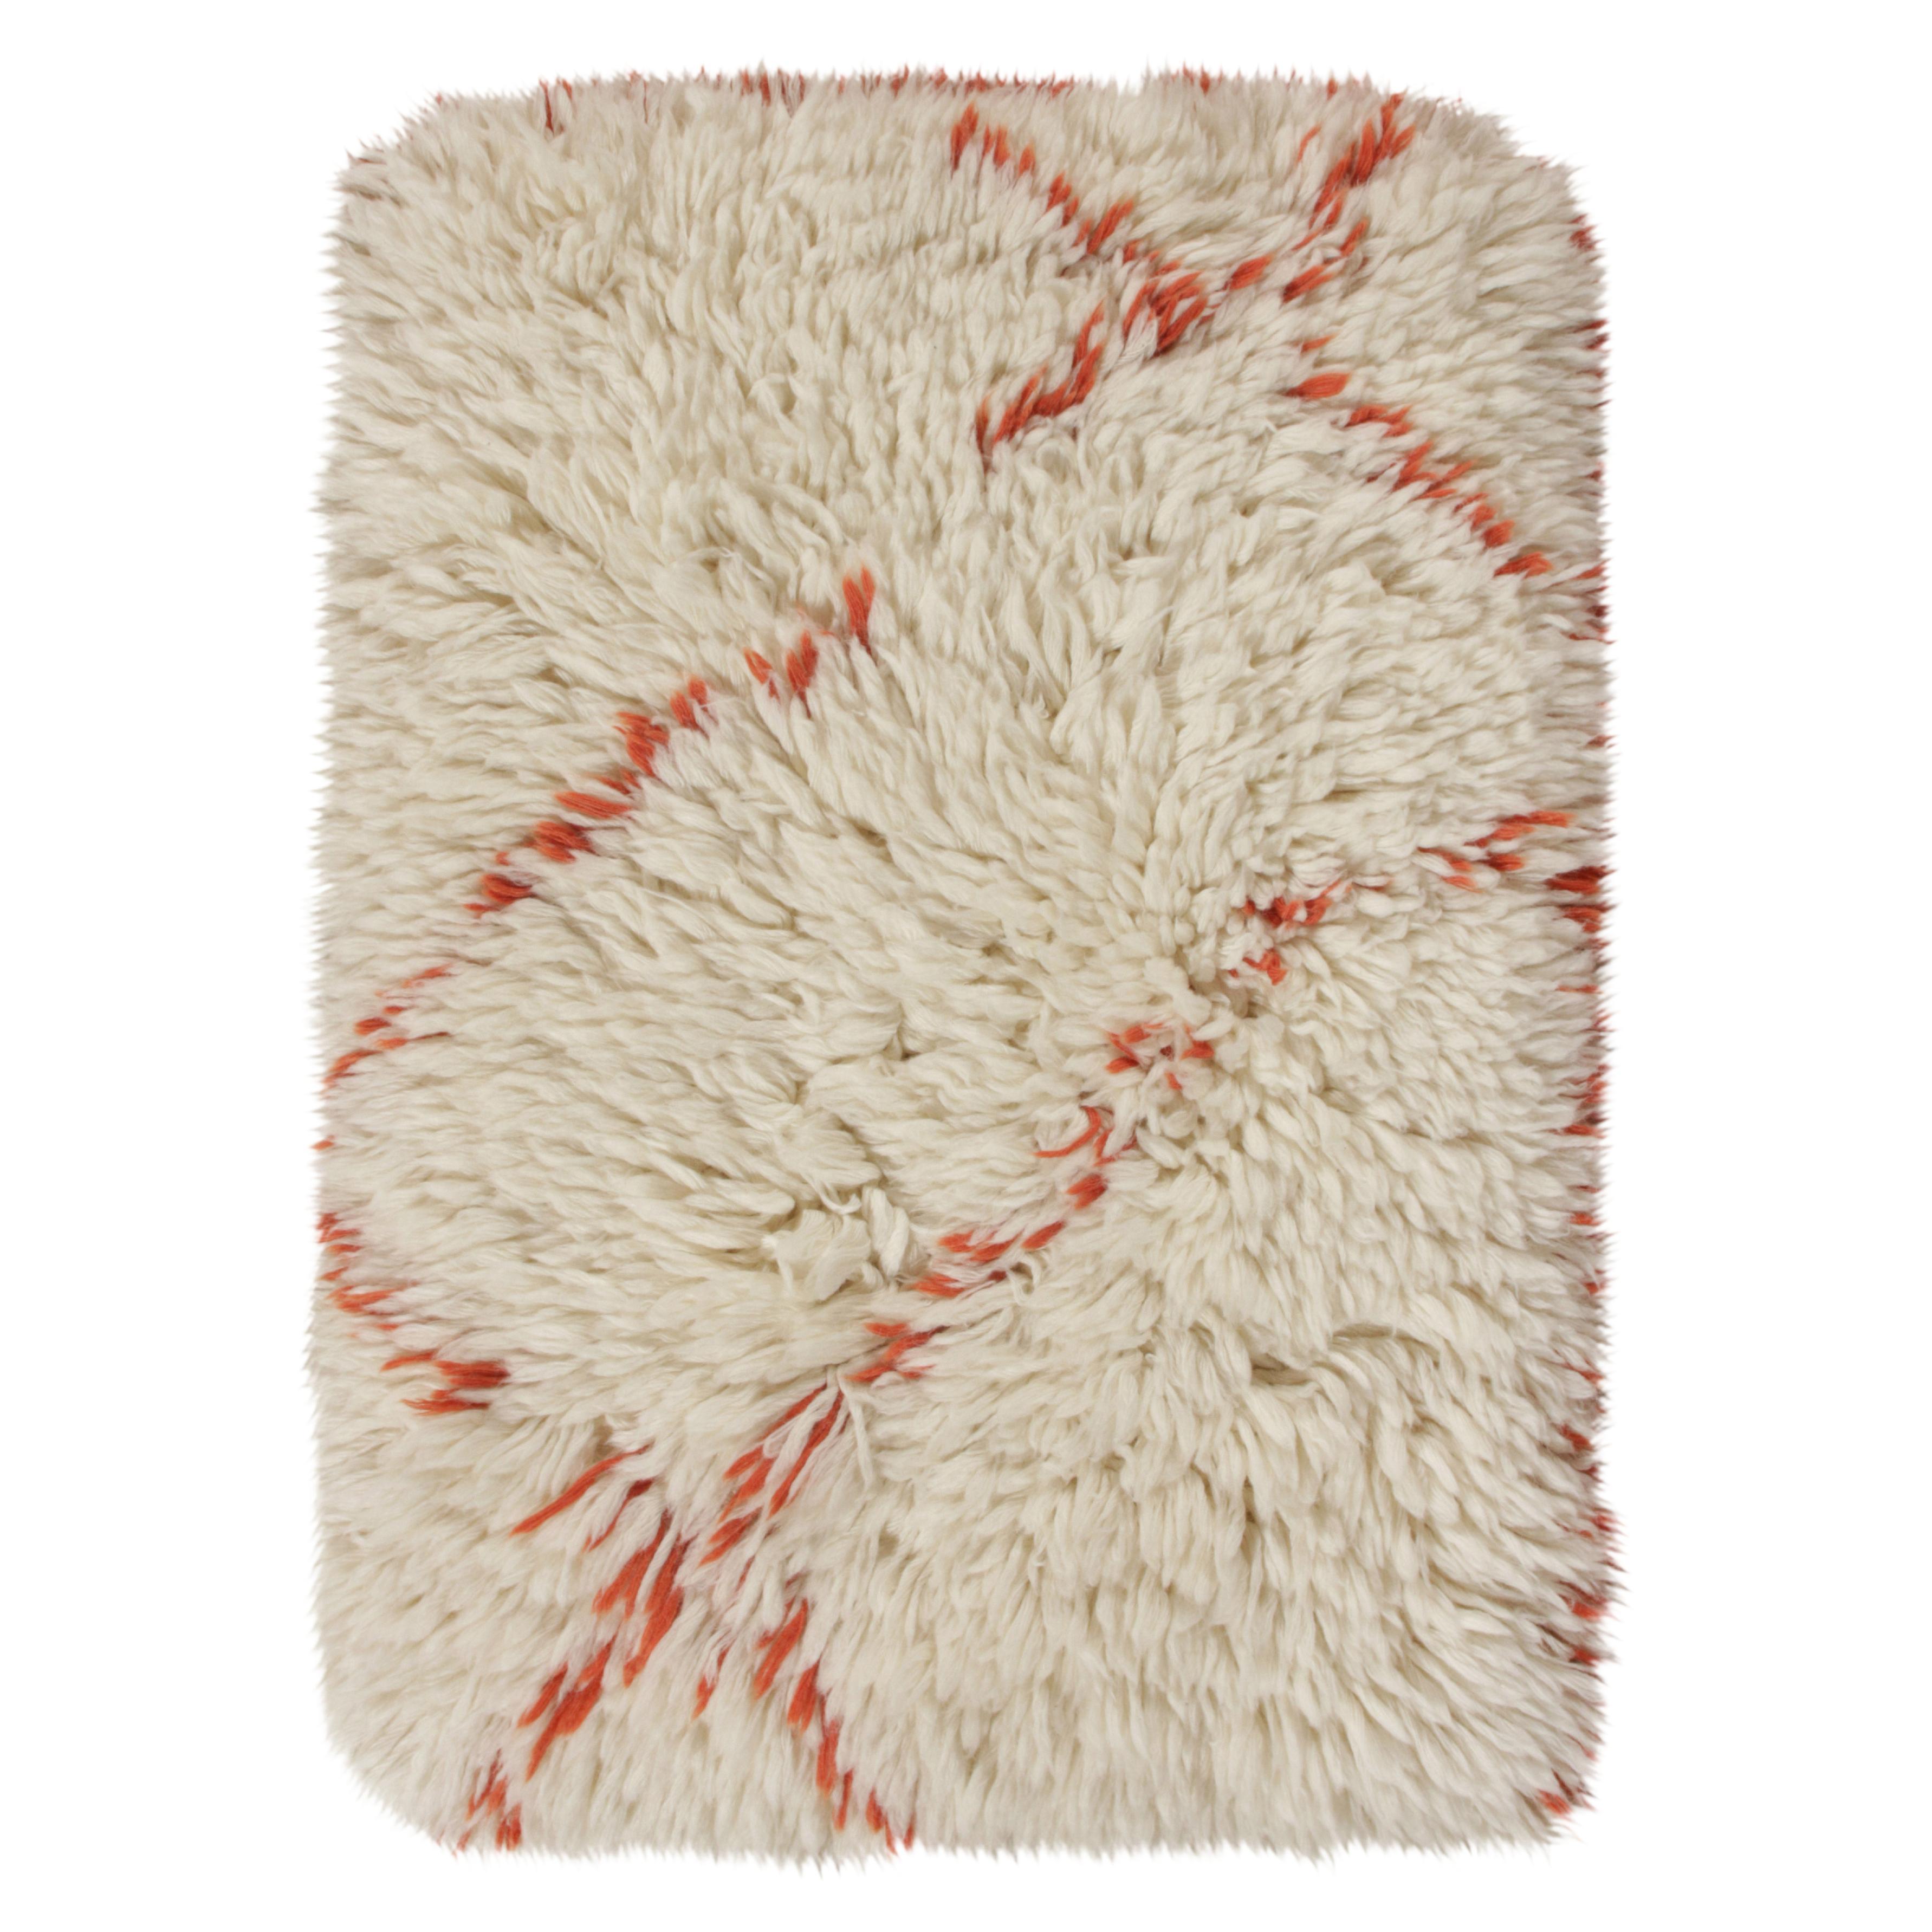 Rug & Kilim’s Moroccan Style Shag Rug in White, Red Geometric Pattern